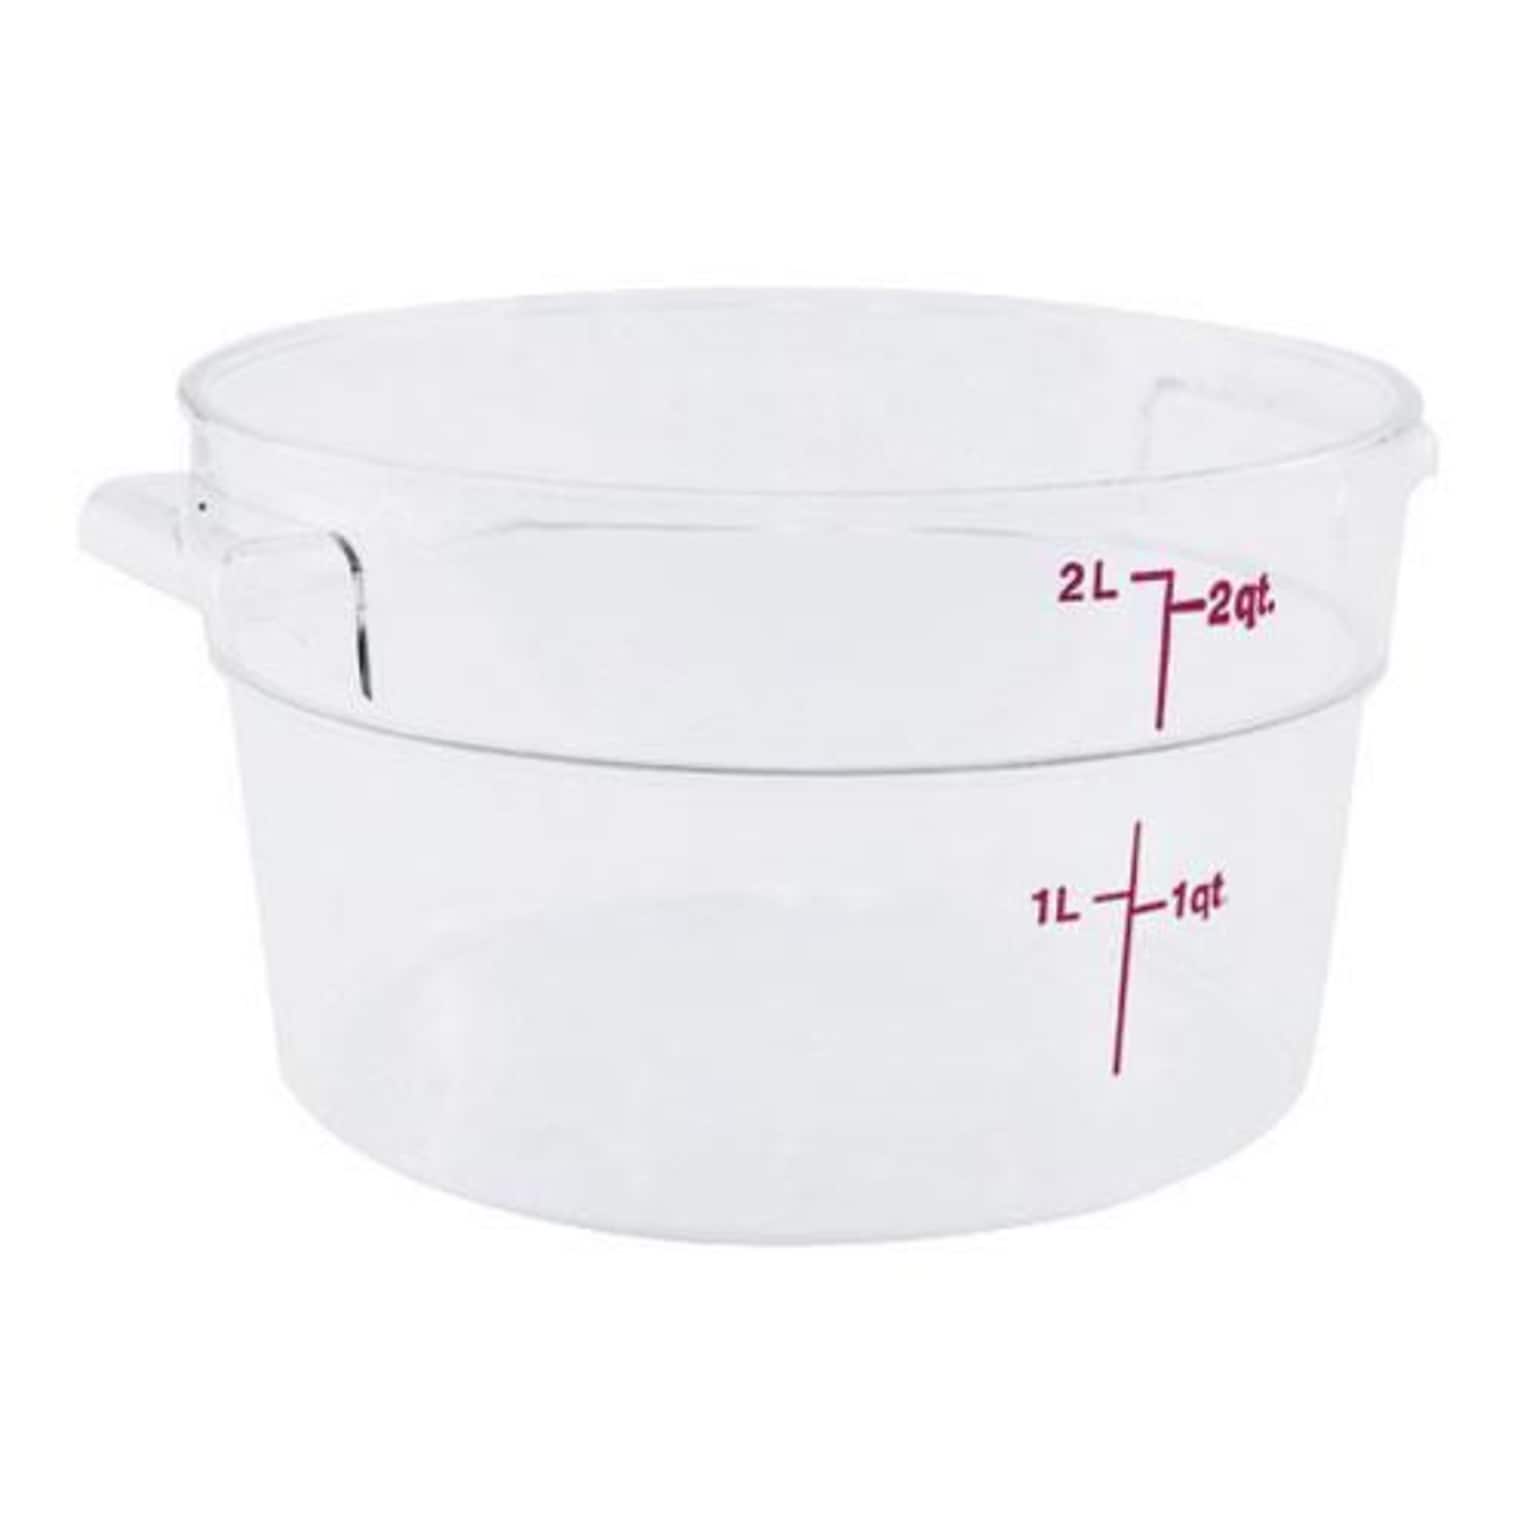 Cambro 2 Qt. Camwear® Food Storage Container, 8 3/16  D X 4 3/16 H, Clear (RFSCW2135)